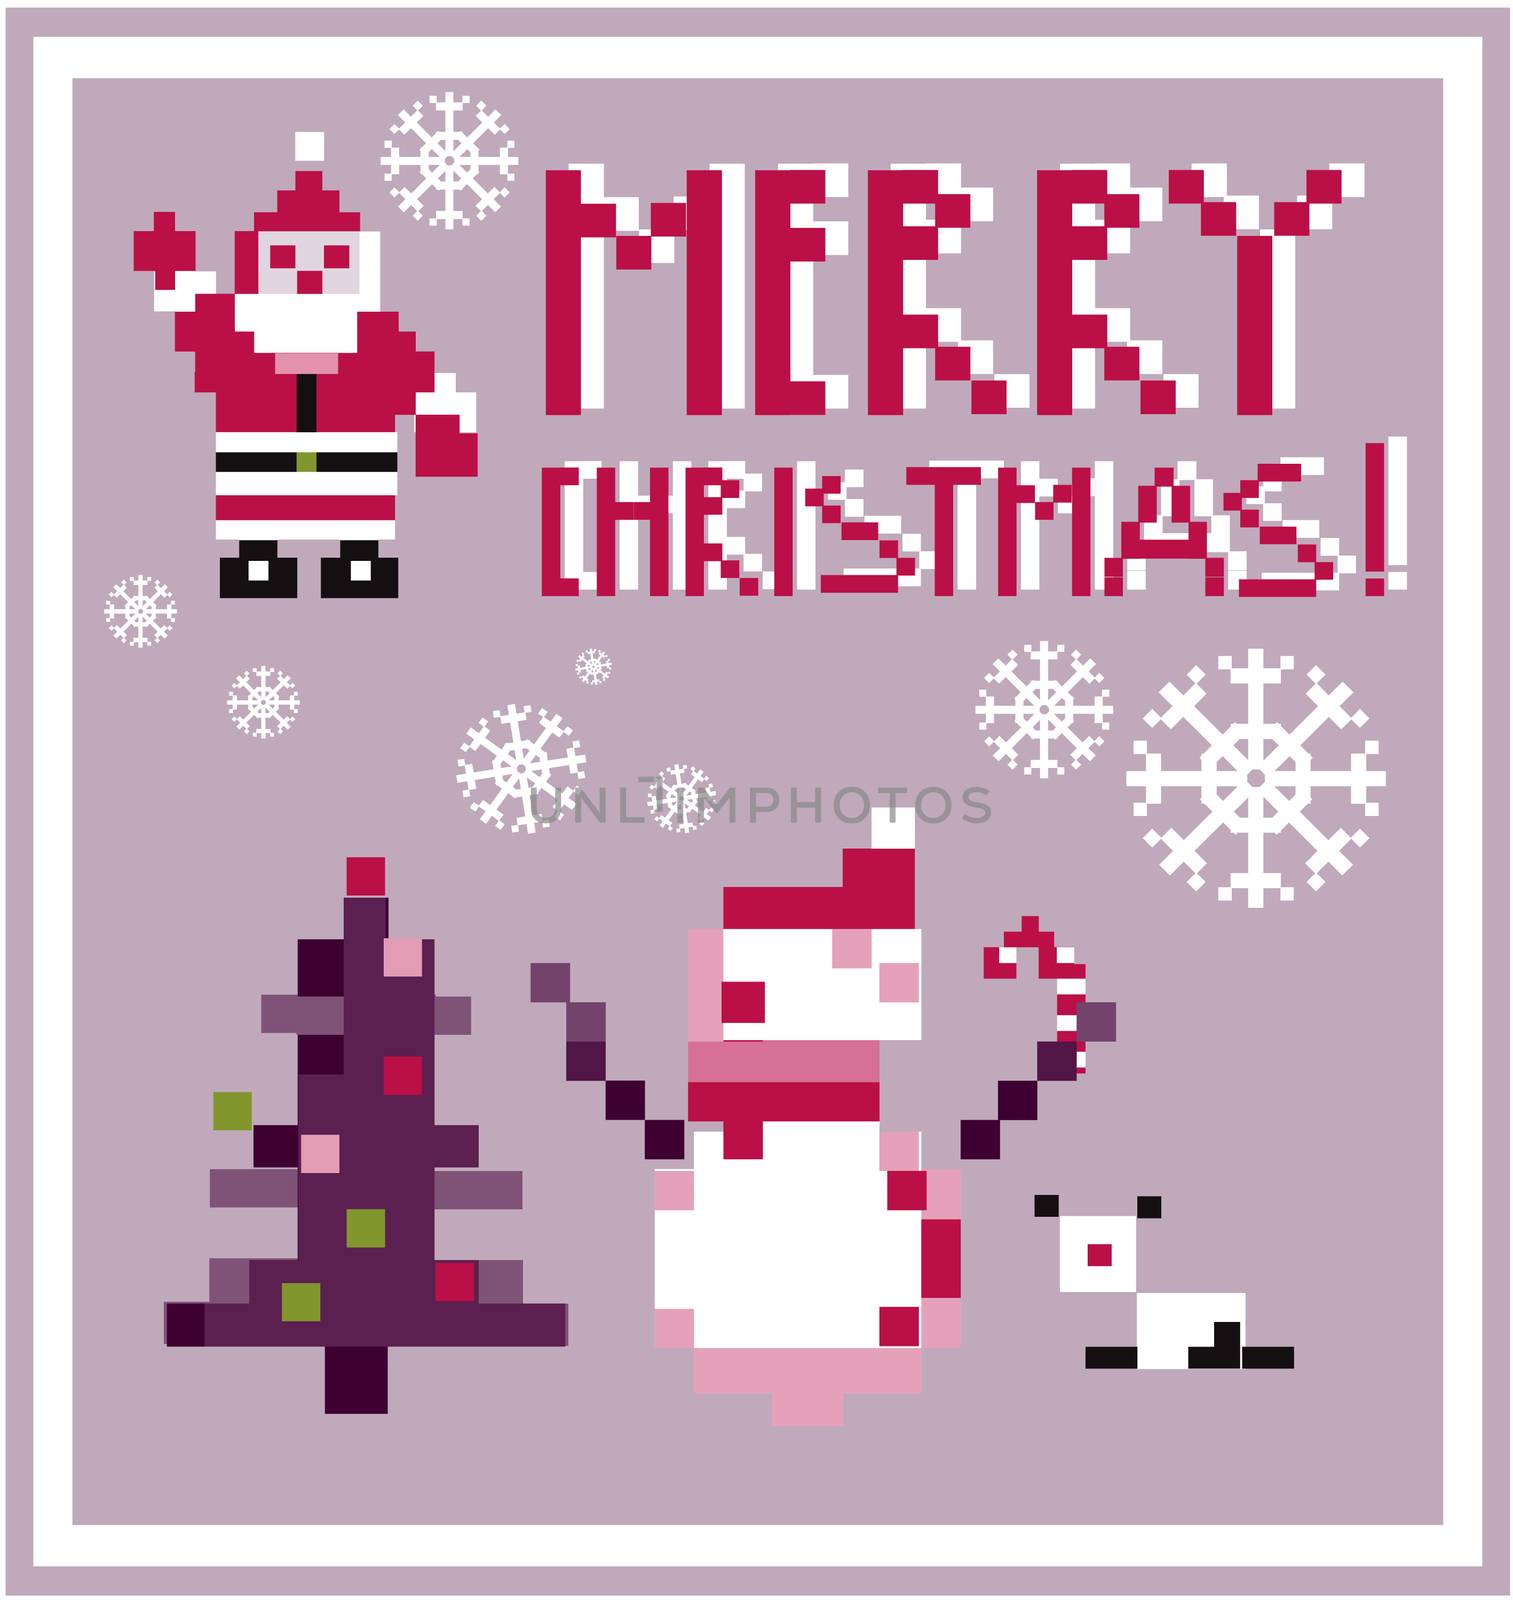 Pixel Holidays People card Santa and Snowman card /  icons set theme in pixel art style, vector illustration